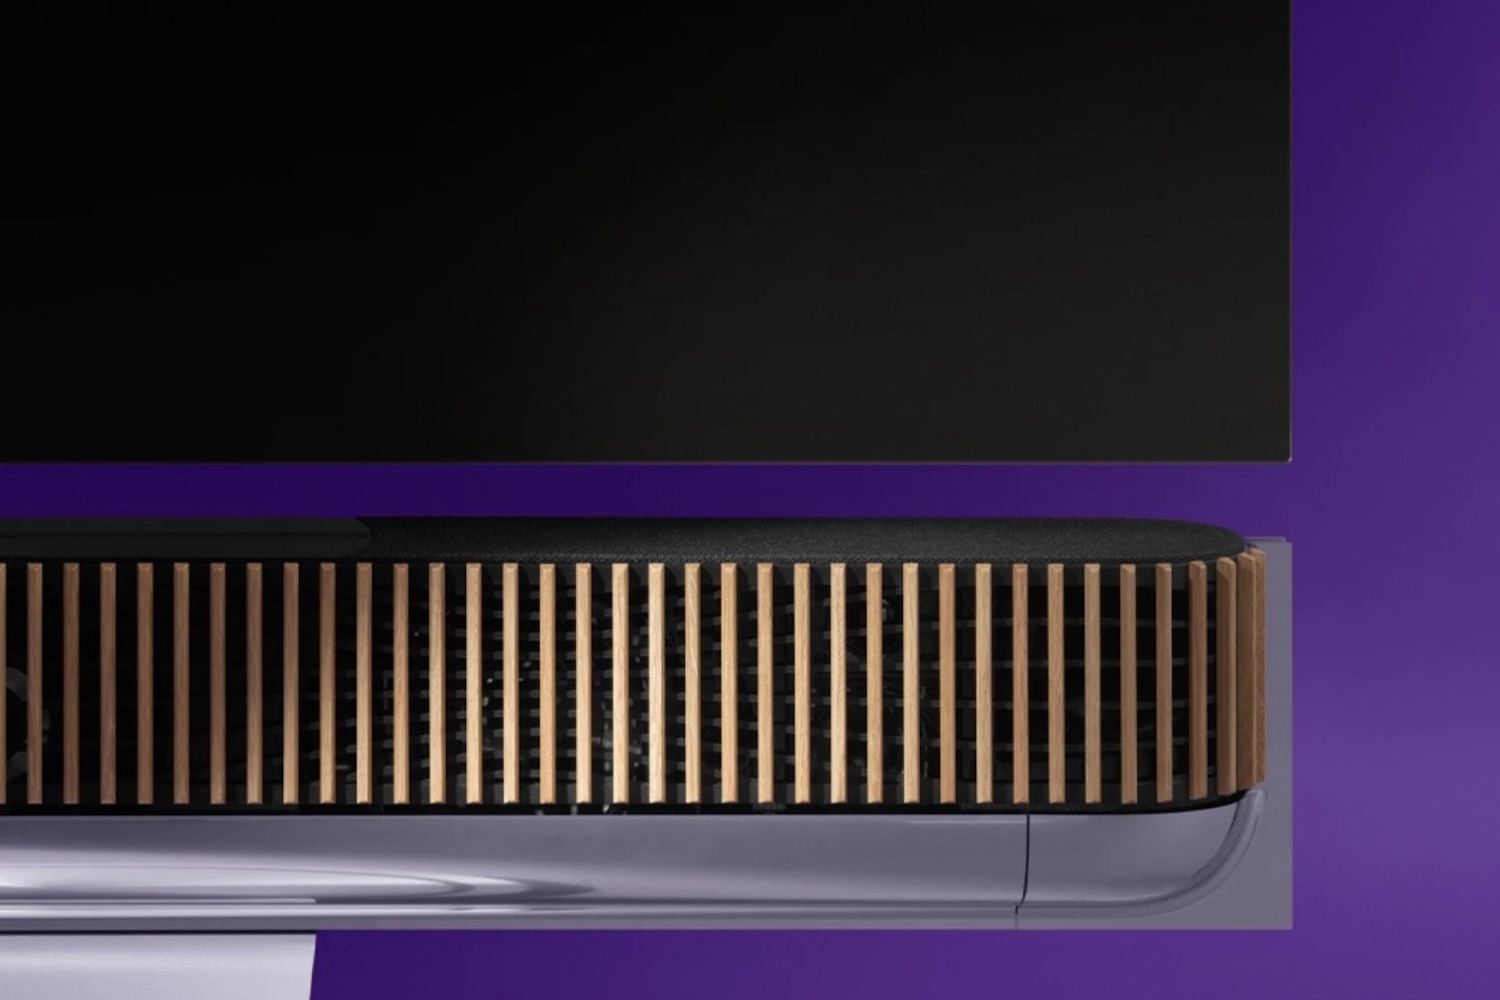 the Bang & Olufsen Beosound Theatre against a purple background